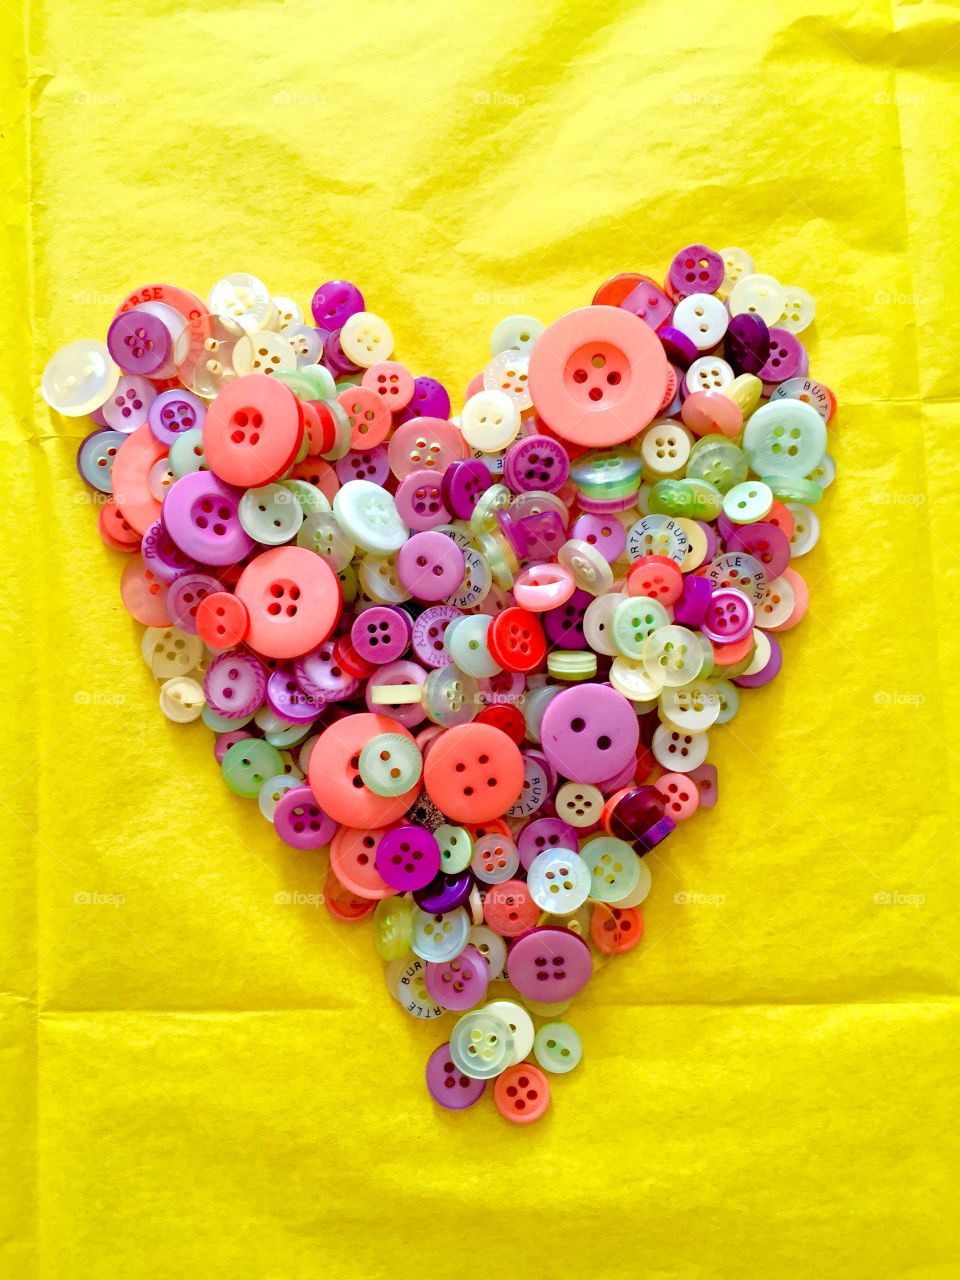 Heart shape made from Buttons